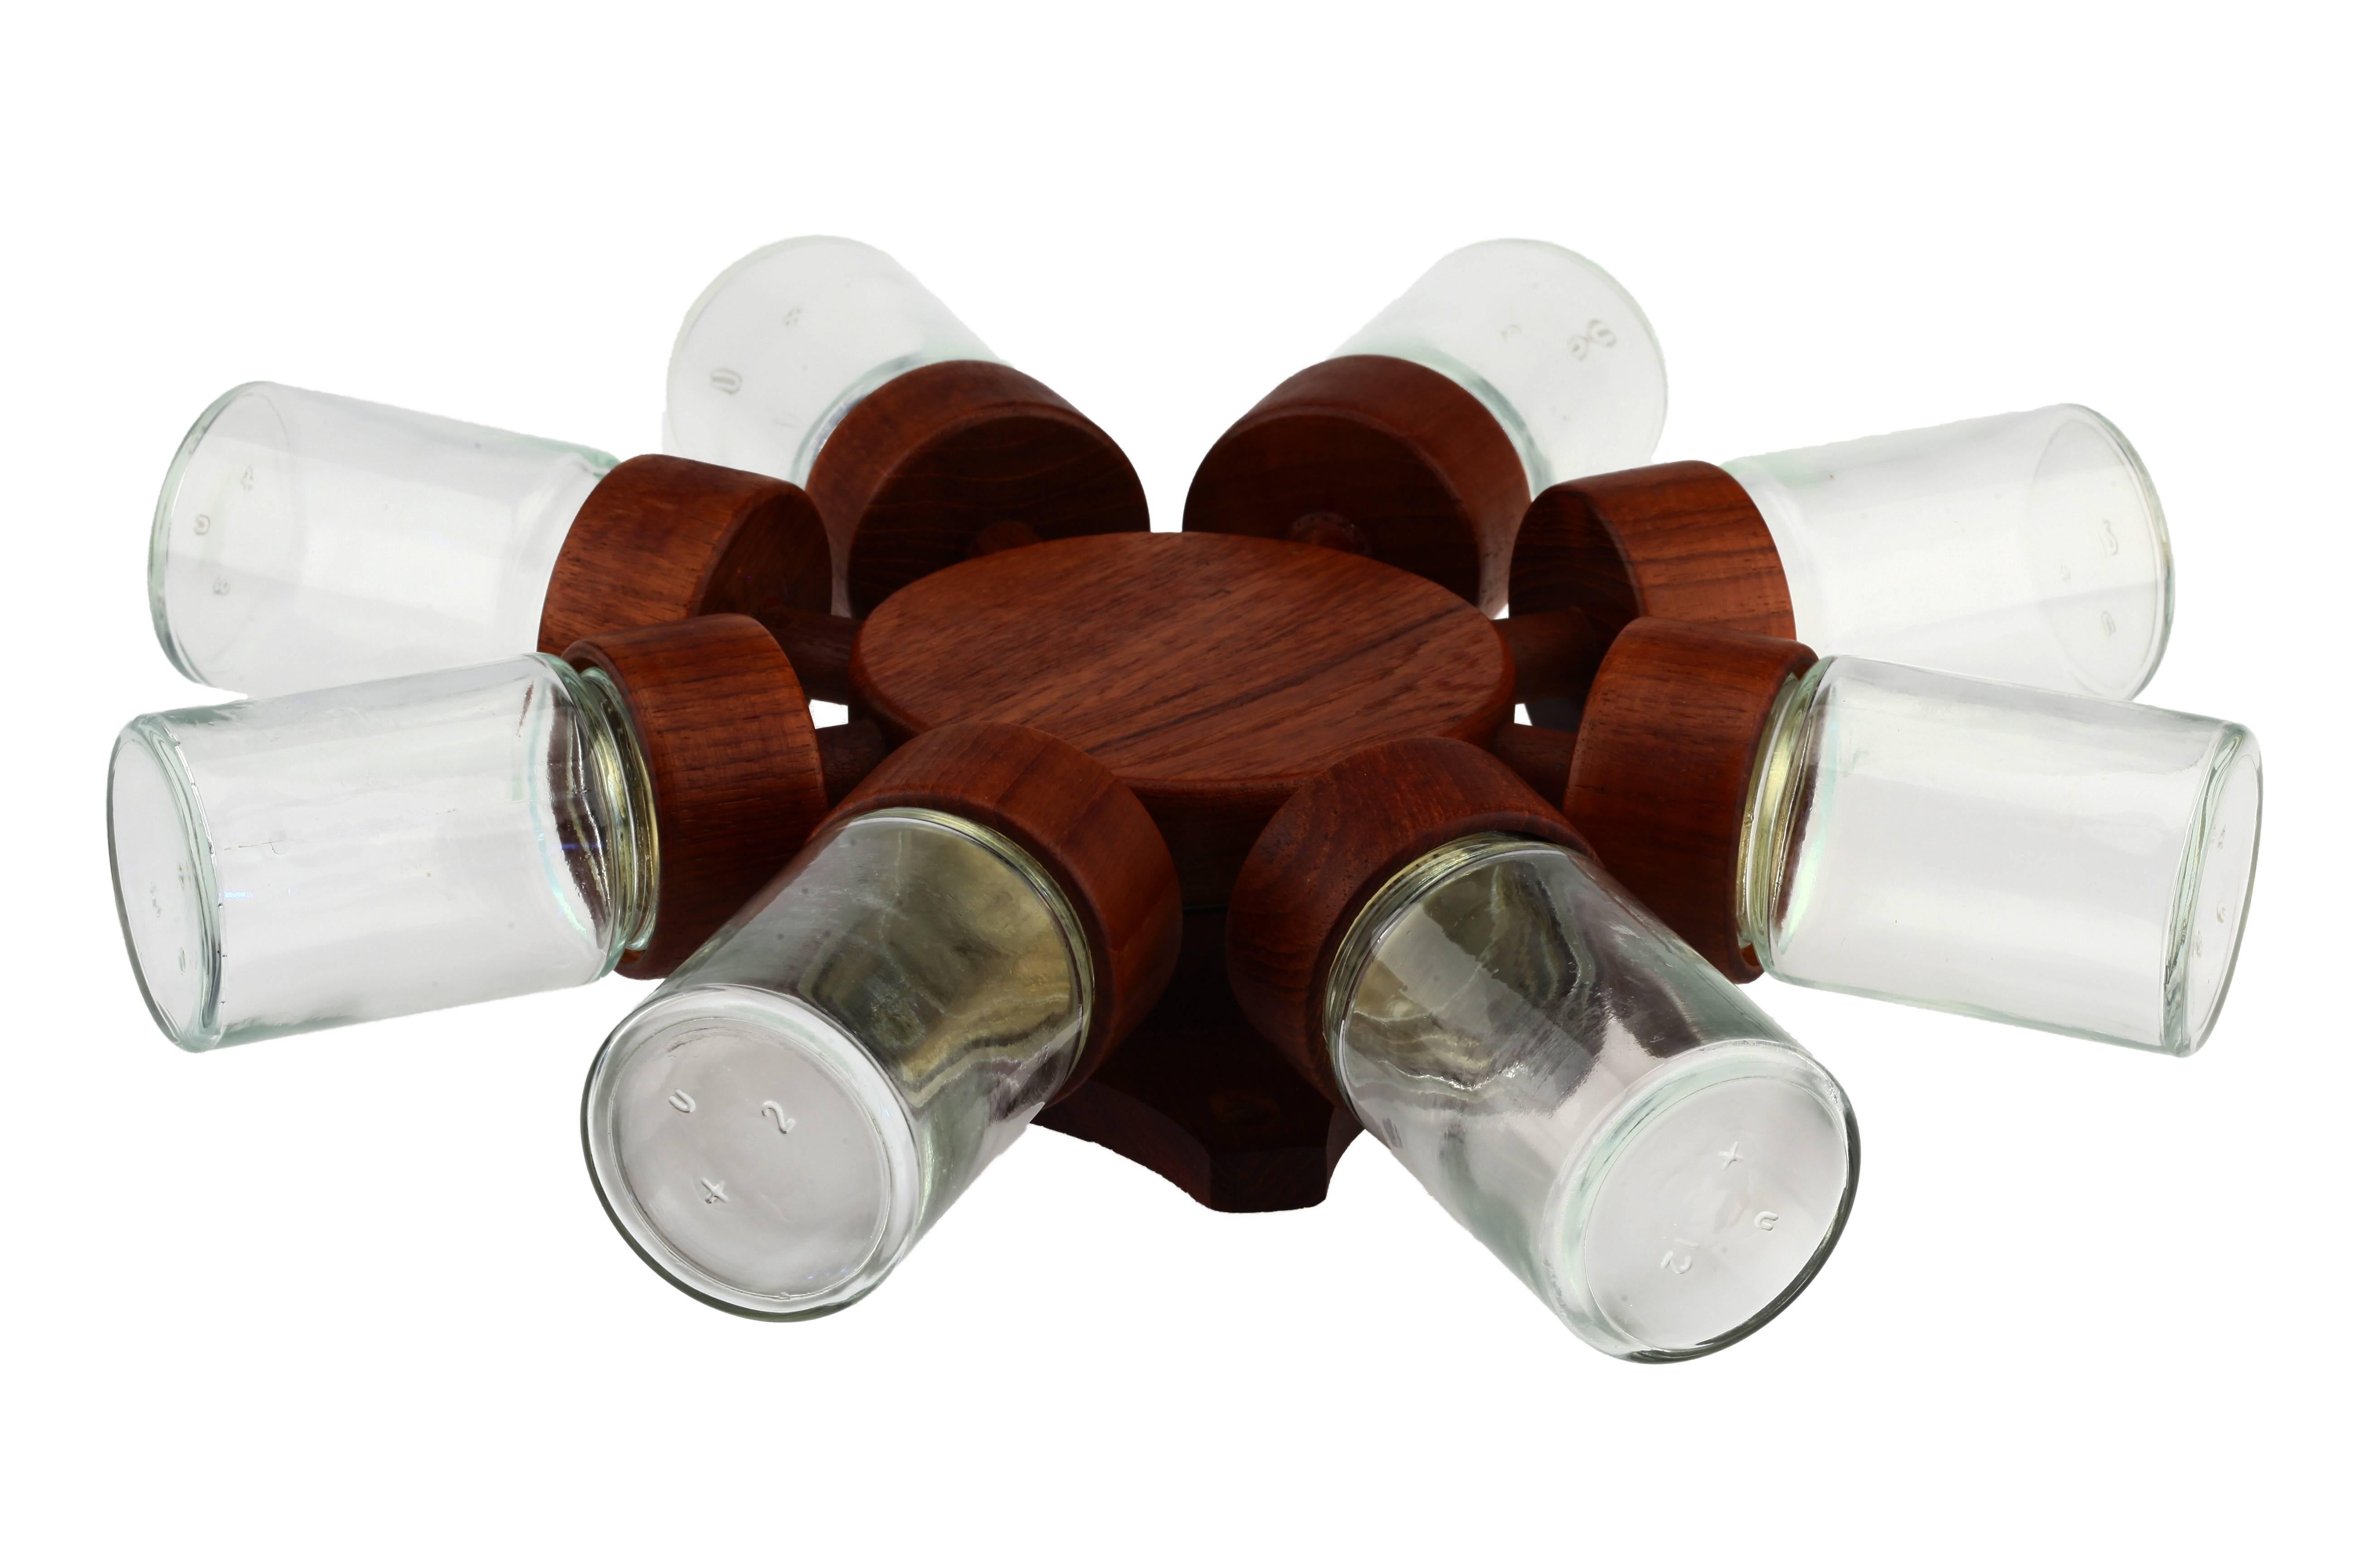 Mid-Century Danish modern teak spinning Digsmed rotating spice rack.

Measures: Height: 8 cm / 3.15 inch
Diameter: 36 cm / 14.2 inch,
Glass length approximately: 9 cm / 3.5 inch.

It is in an very good condition. (Please do not hesitate to